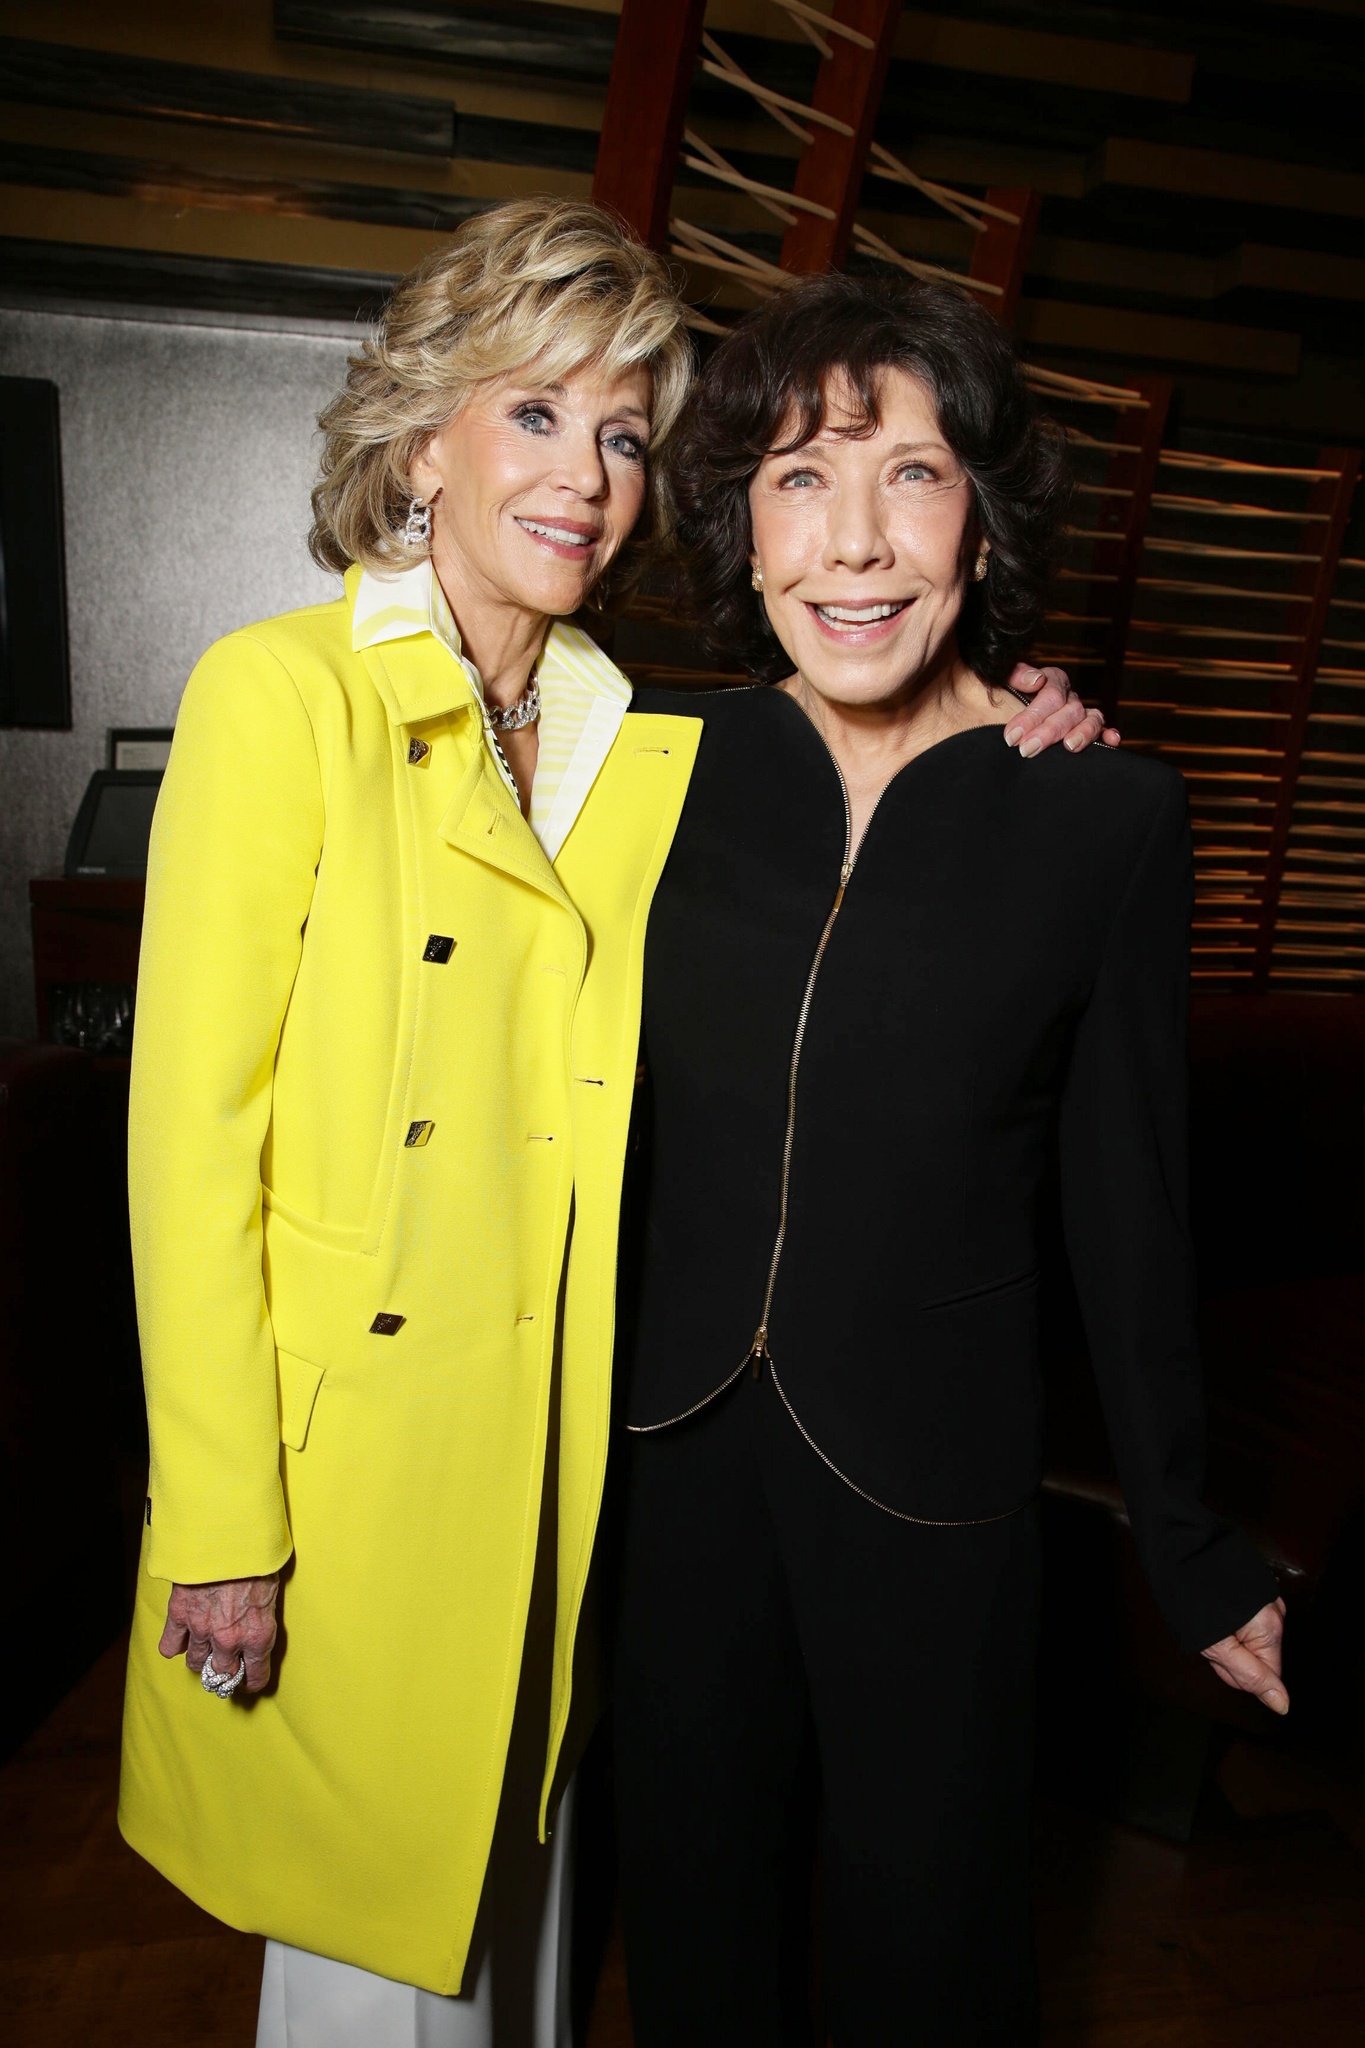 Jane Fonda and Lily Tomlin at event of Grace and Frankie (2015)